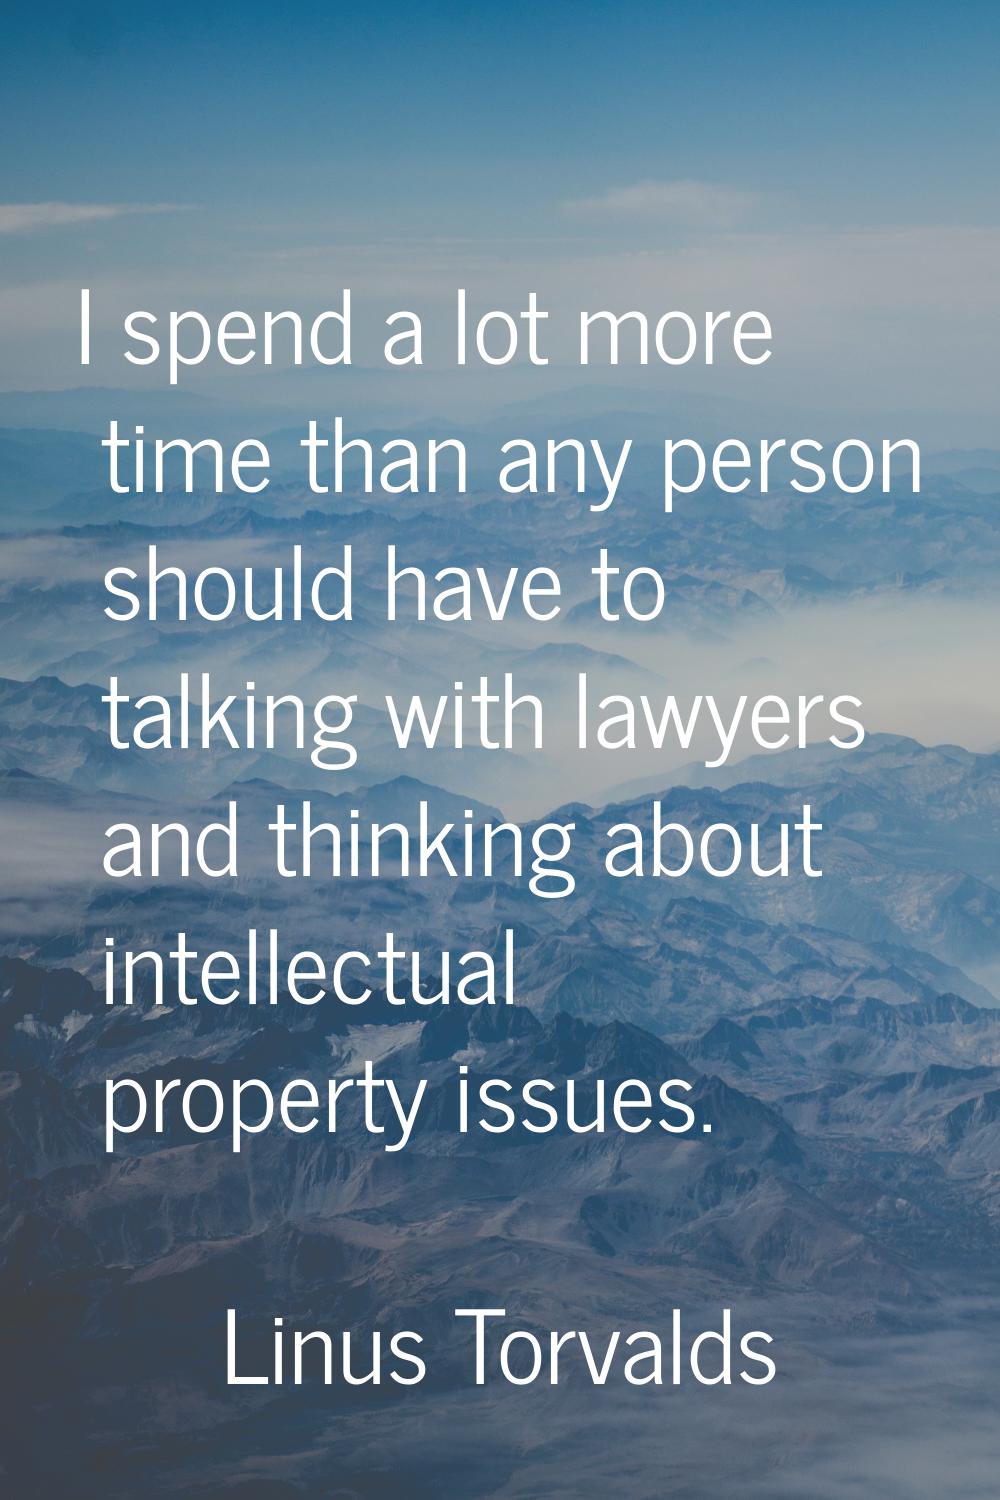 I spend a lot more time than any person should have to talking with lawyers and thinking about inte